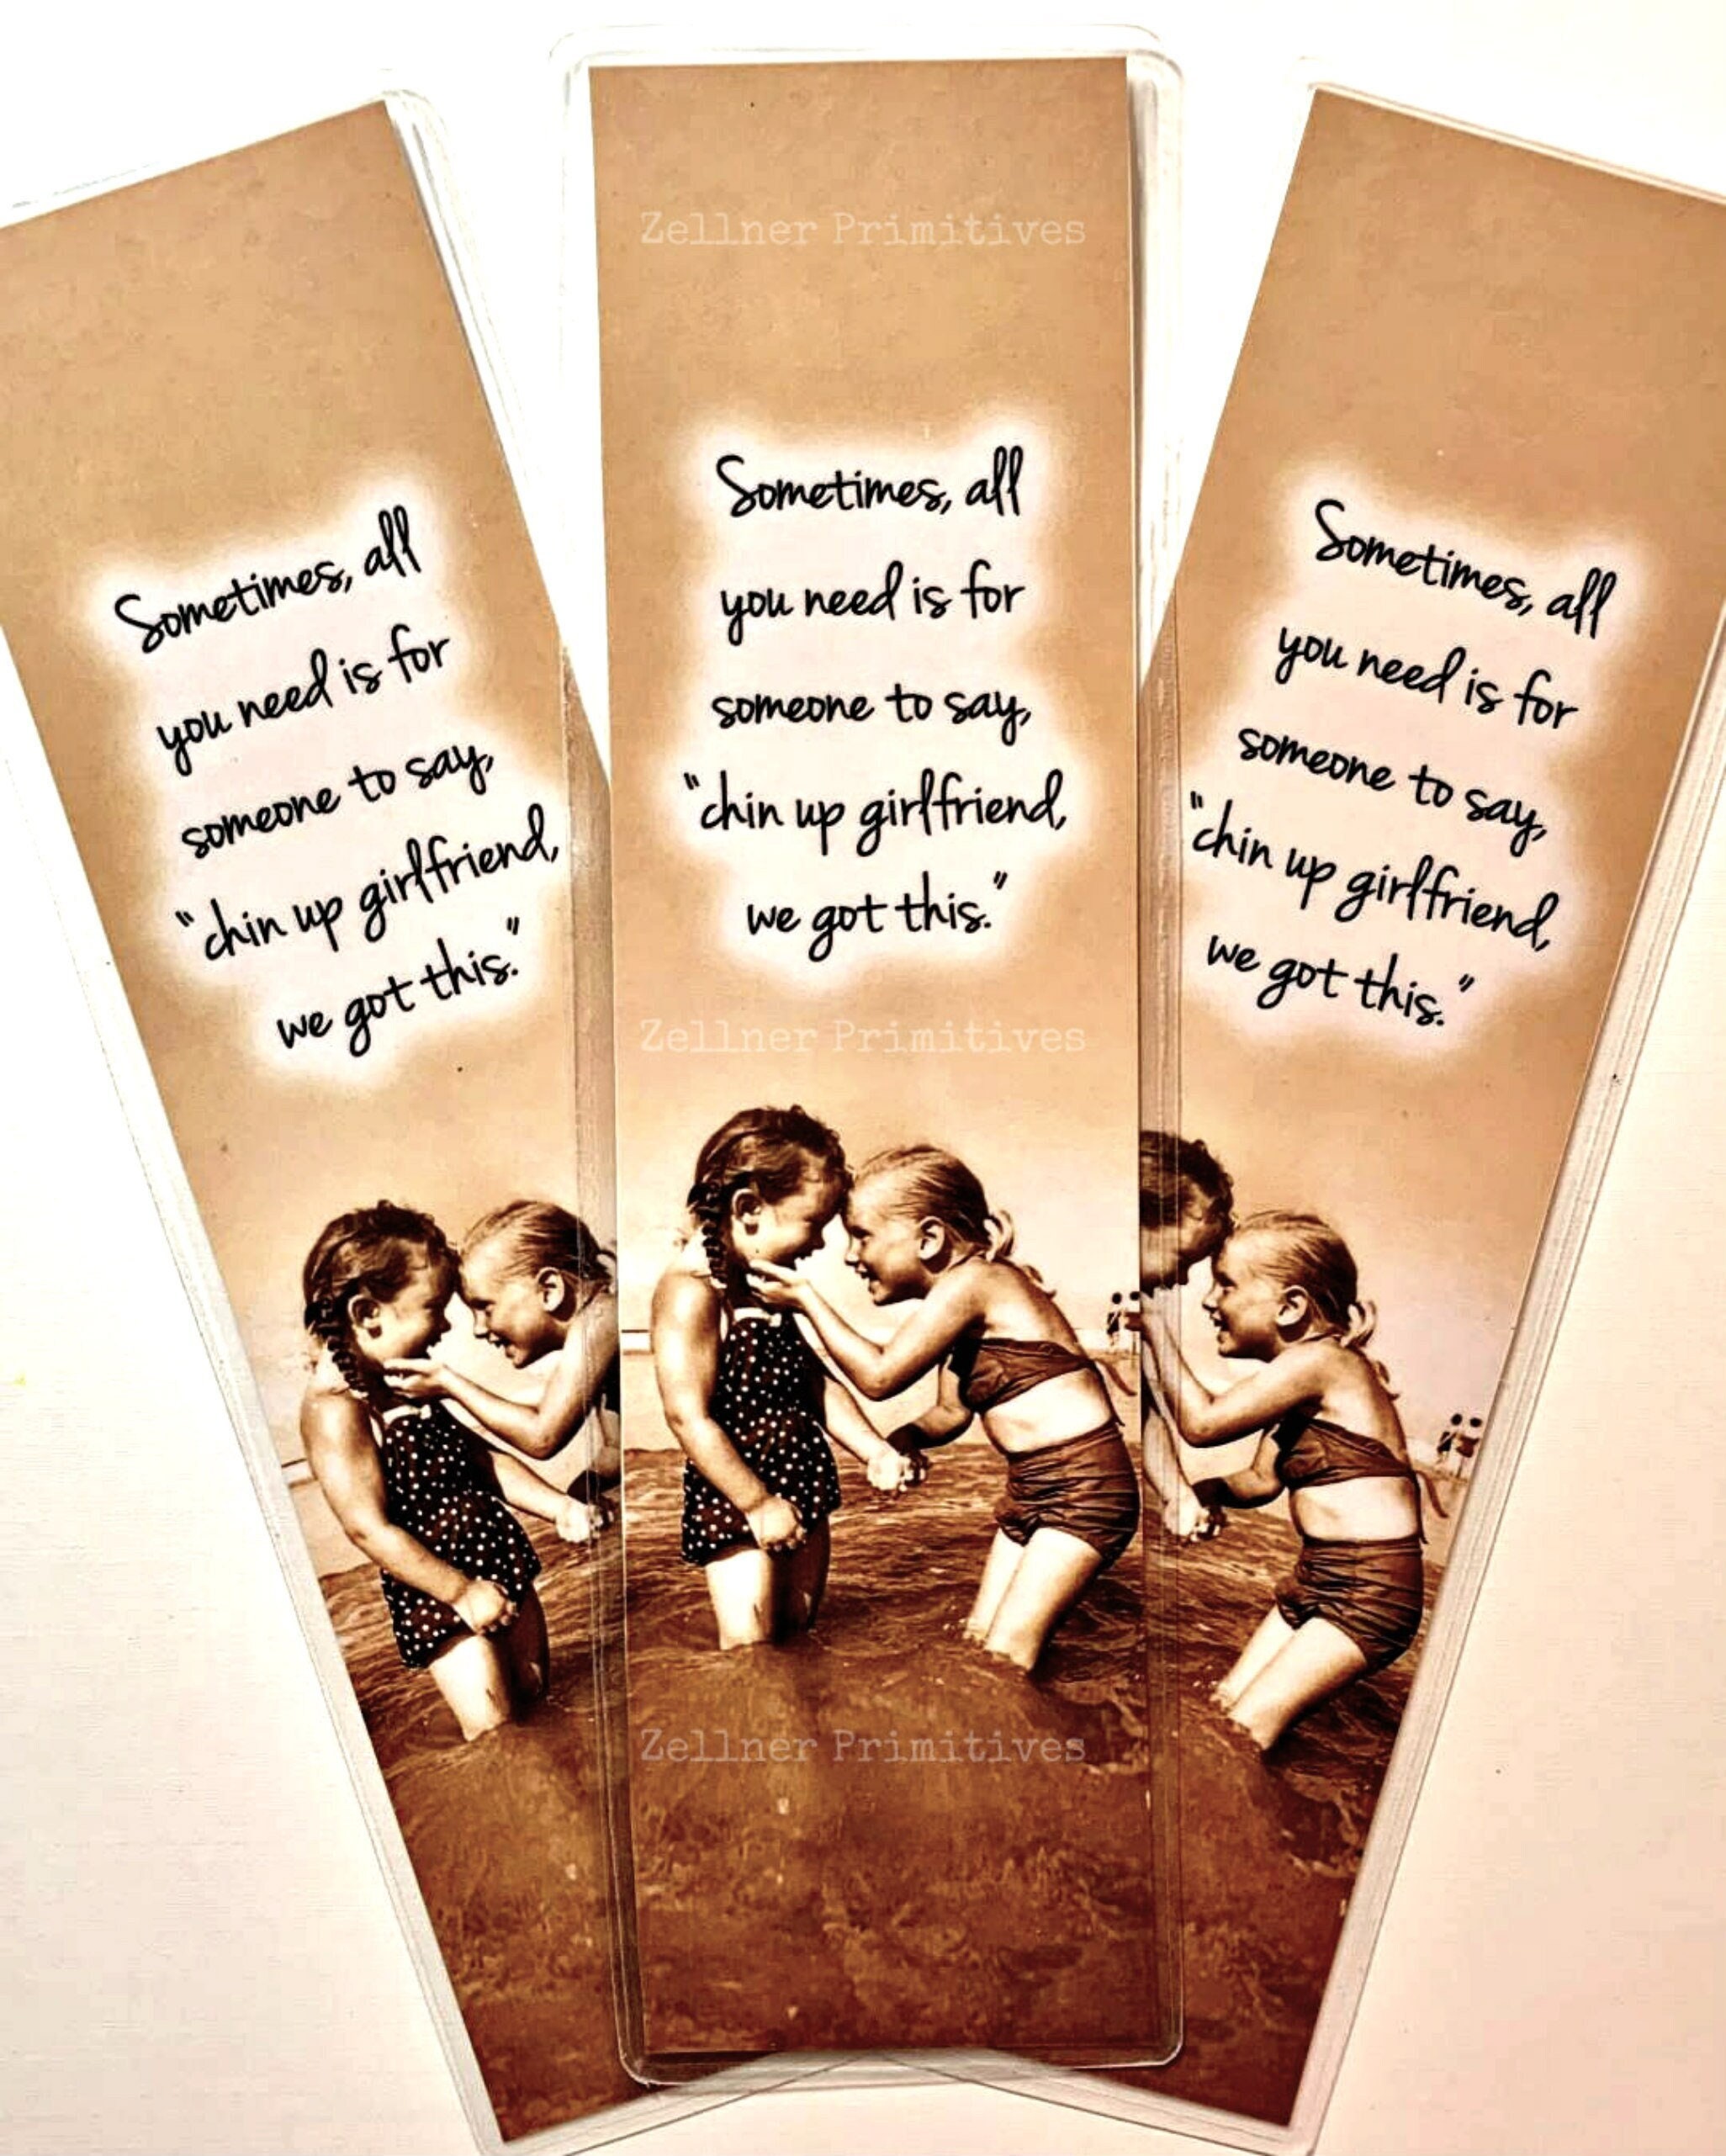 This Bookmark Would Make a Wonderful Gift to Give Your Friend pic